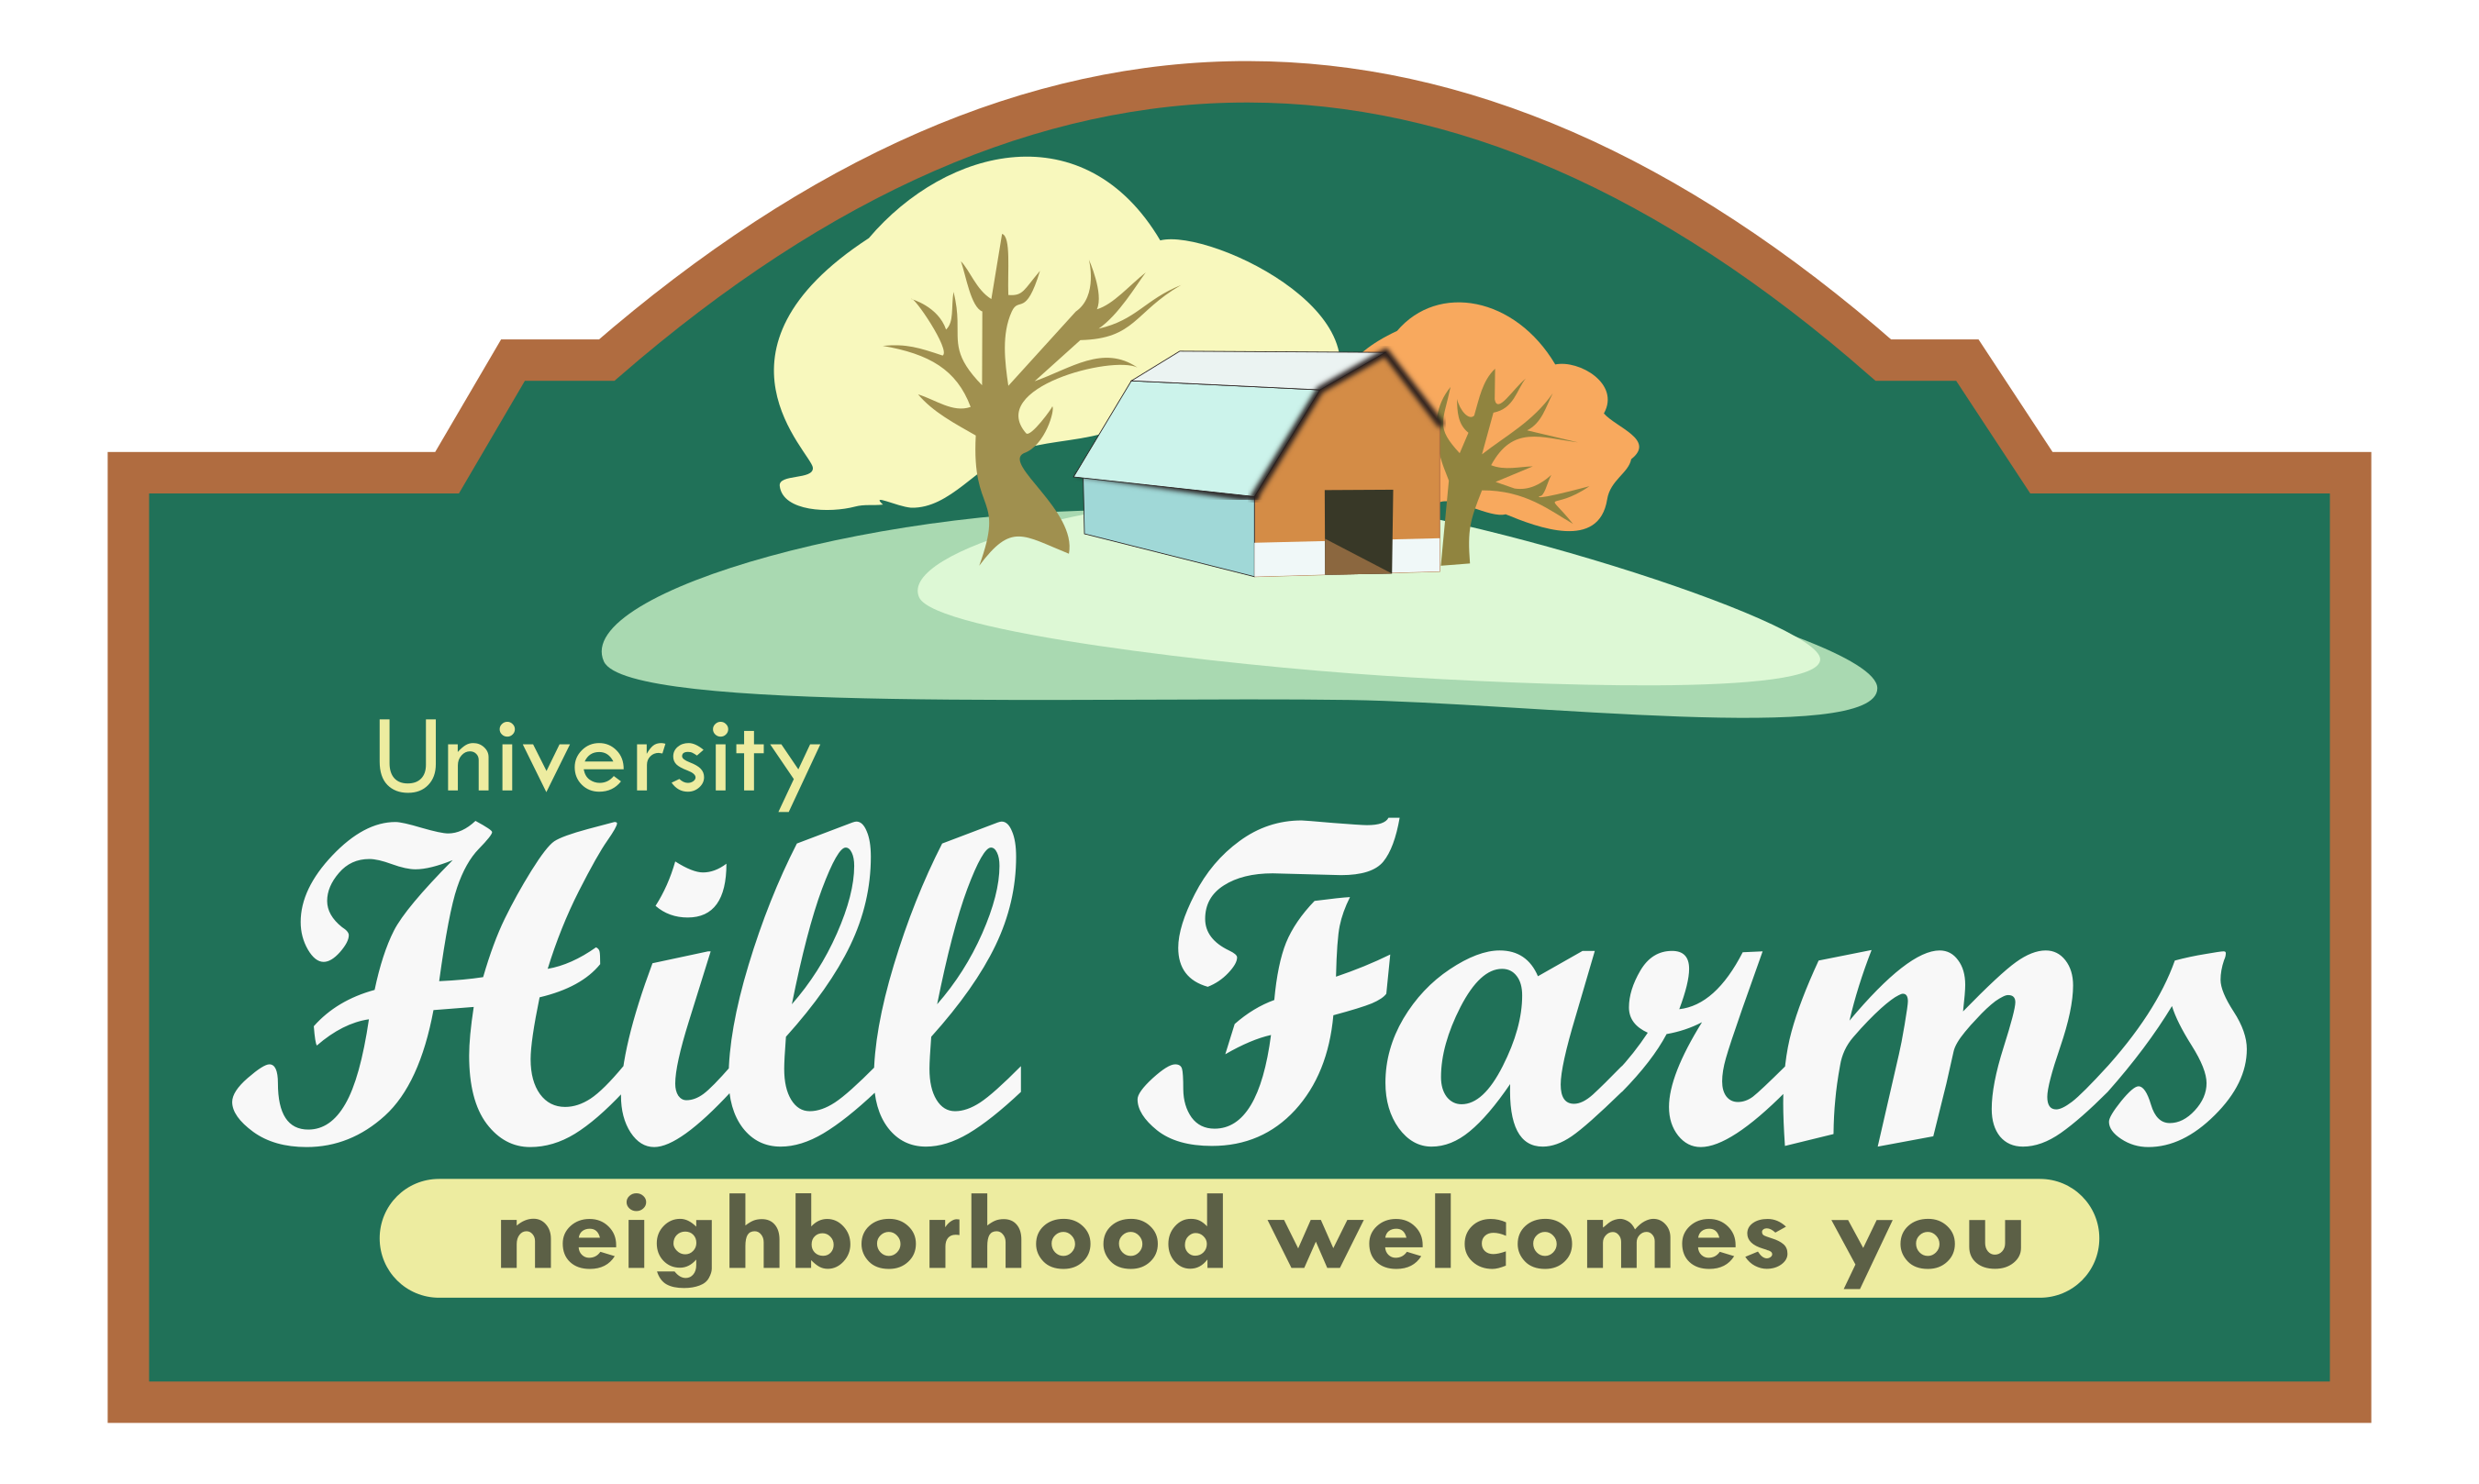 University Hill Farms Neighborhood — The Best of Old & New